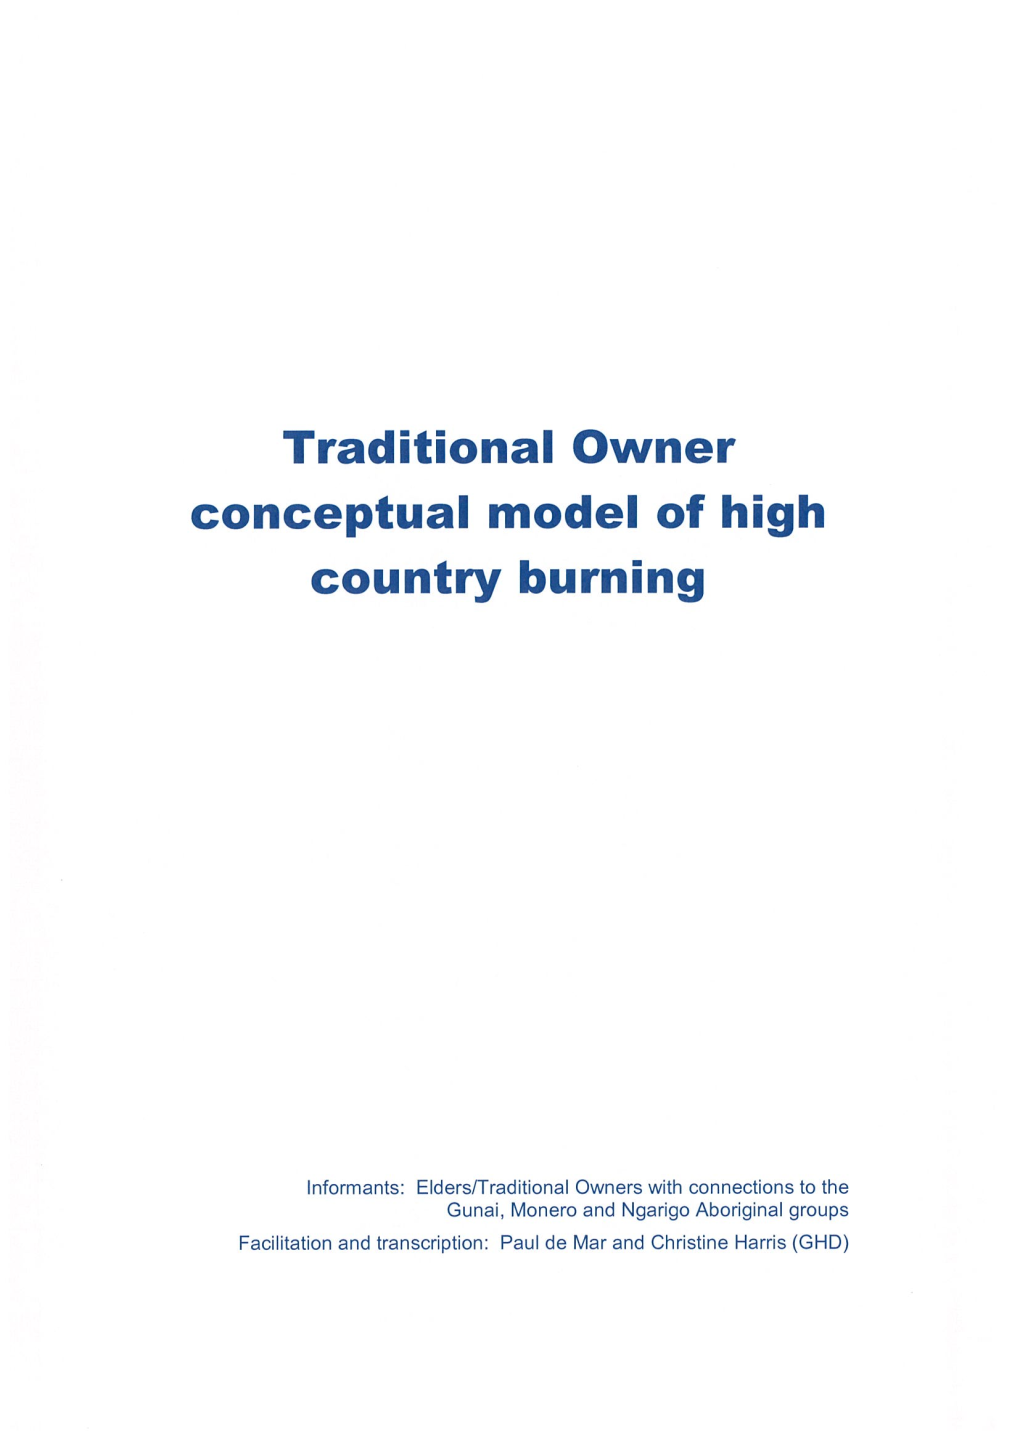 Conceptual Model of High Country Burning